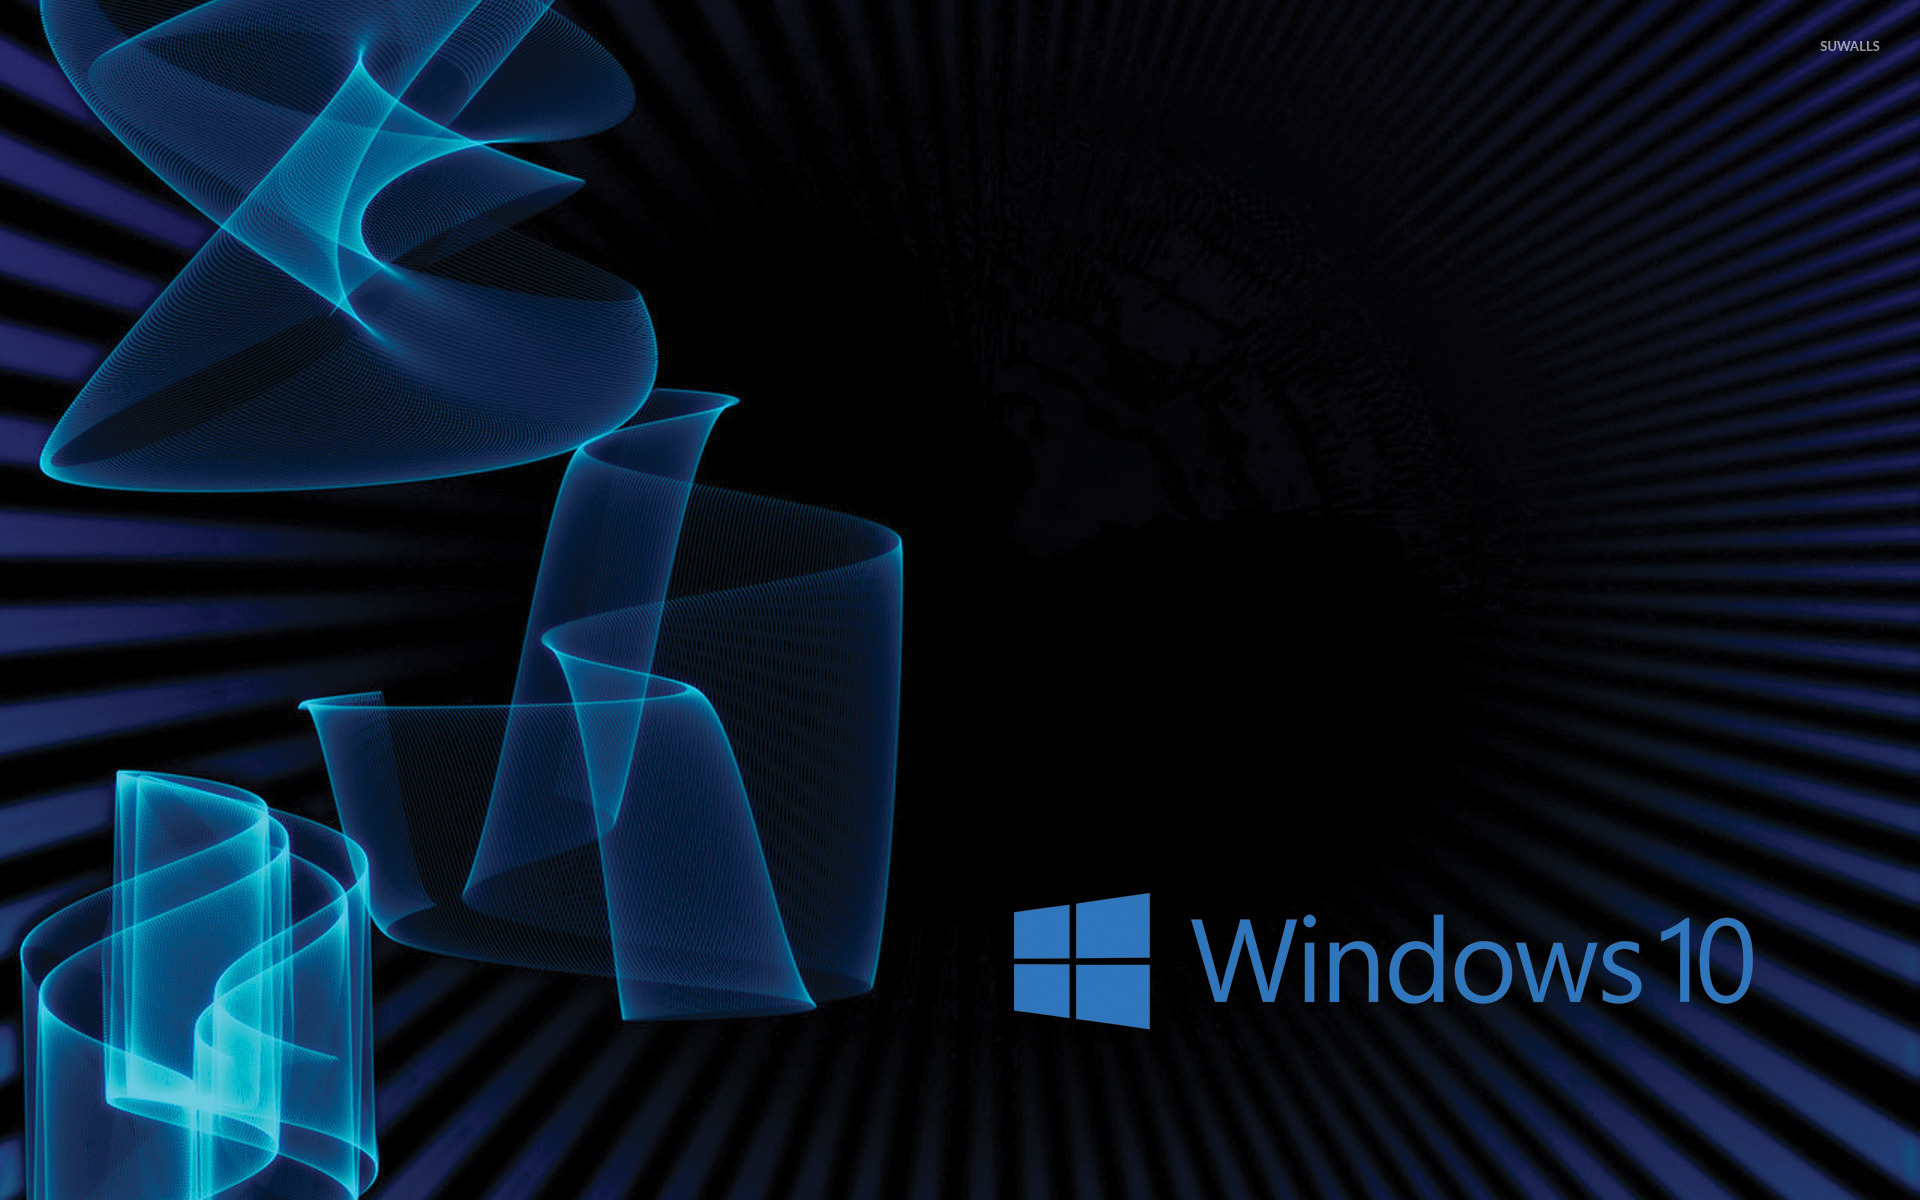 Windows 10 Blue Text Logo On Rays And Waves Wallpaper Computer Wallpapers 45912